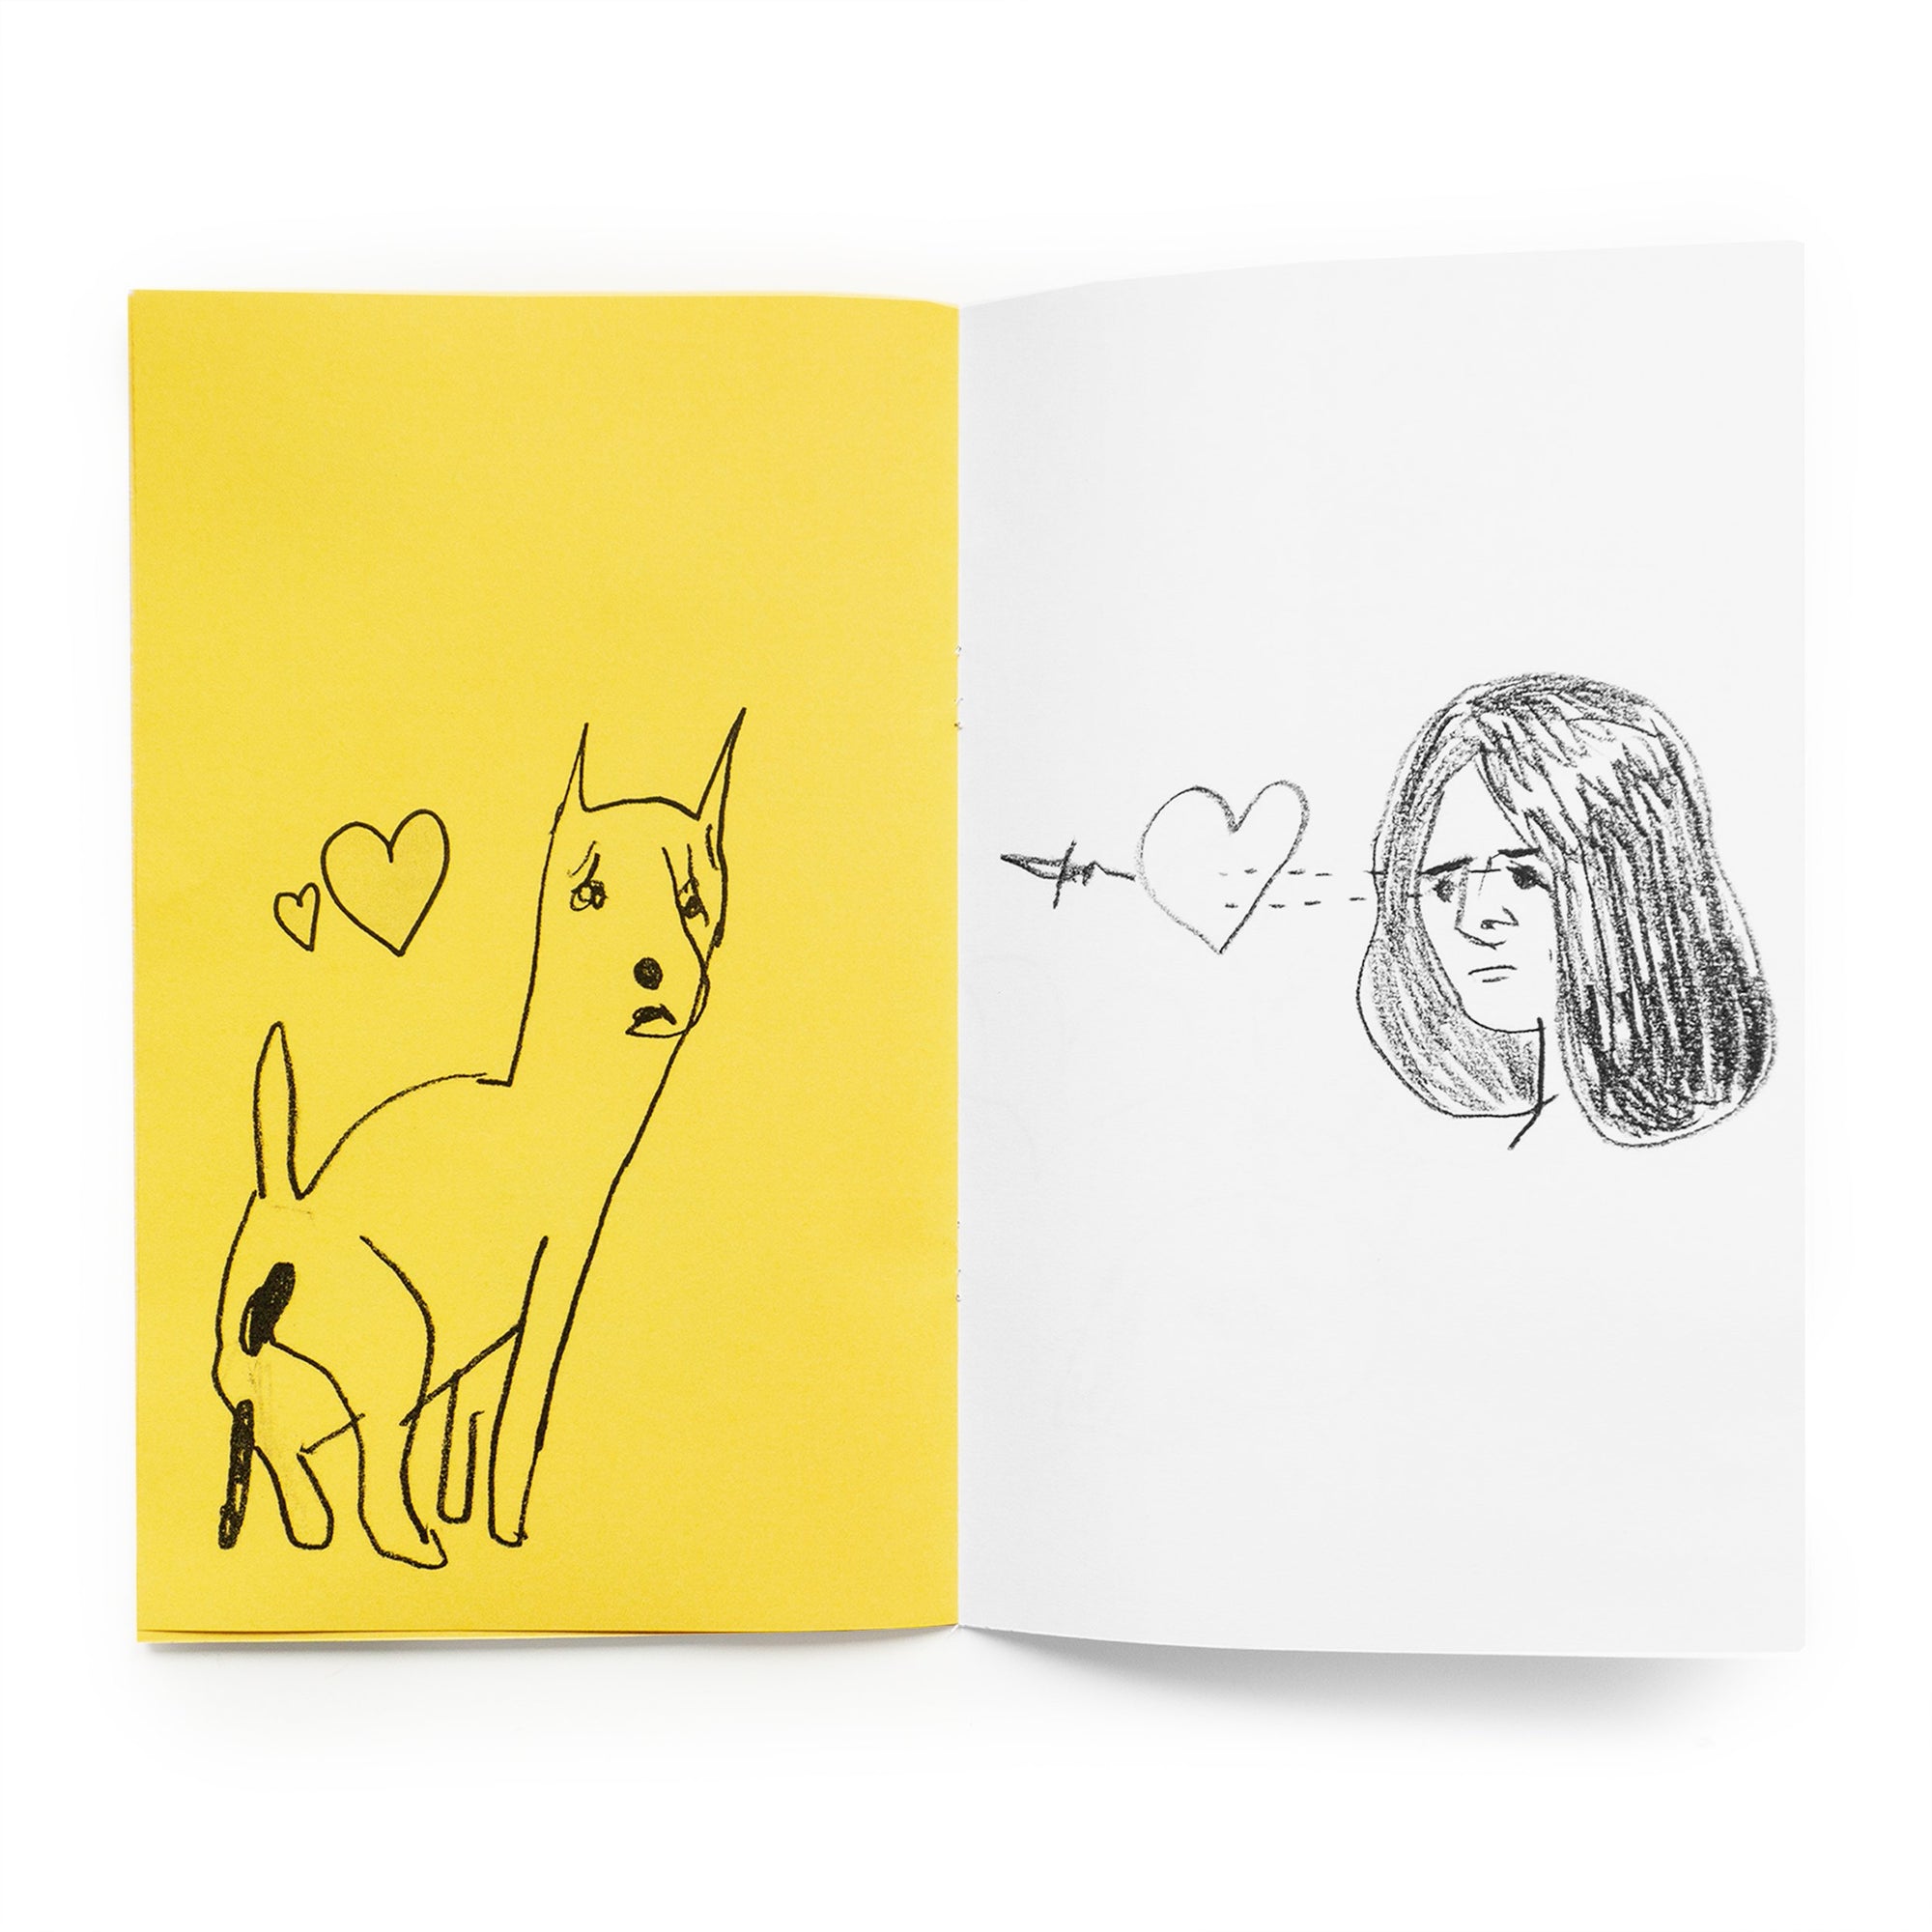 Spread from "Fresh Air". Left page is yellow with black drawing of a dog pooping; right page is white with a pencil drawing of a woman shooting a dagger through a heart with her eyes.